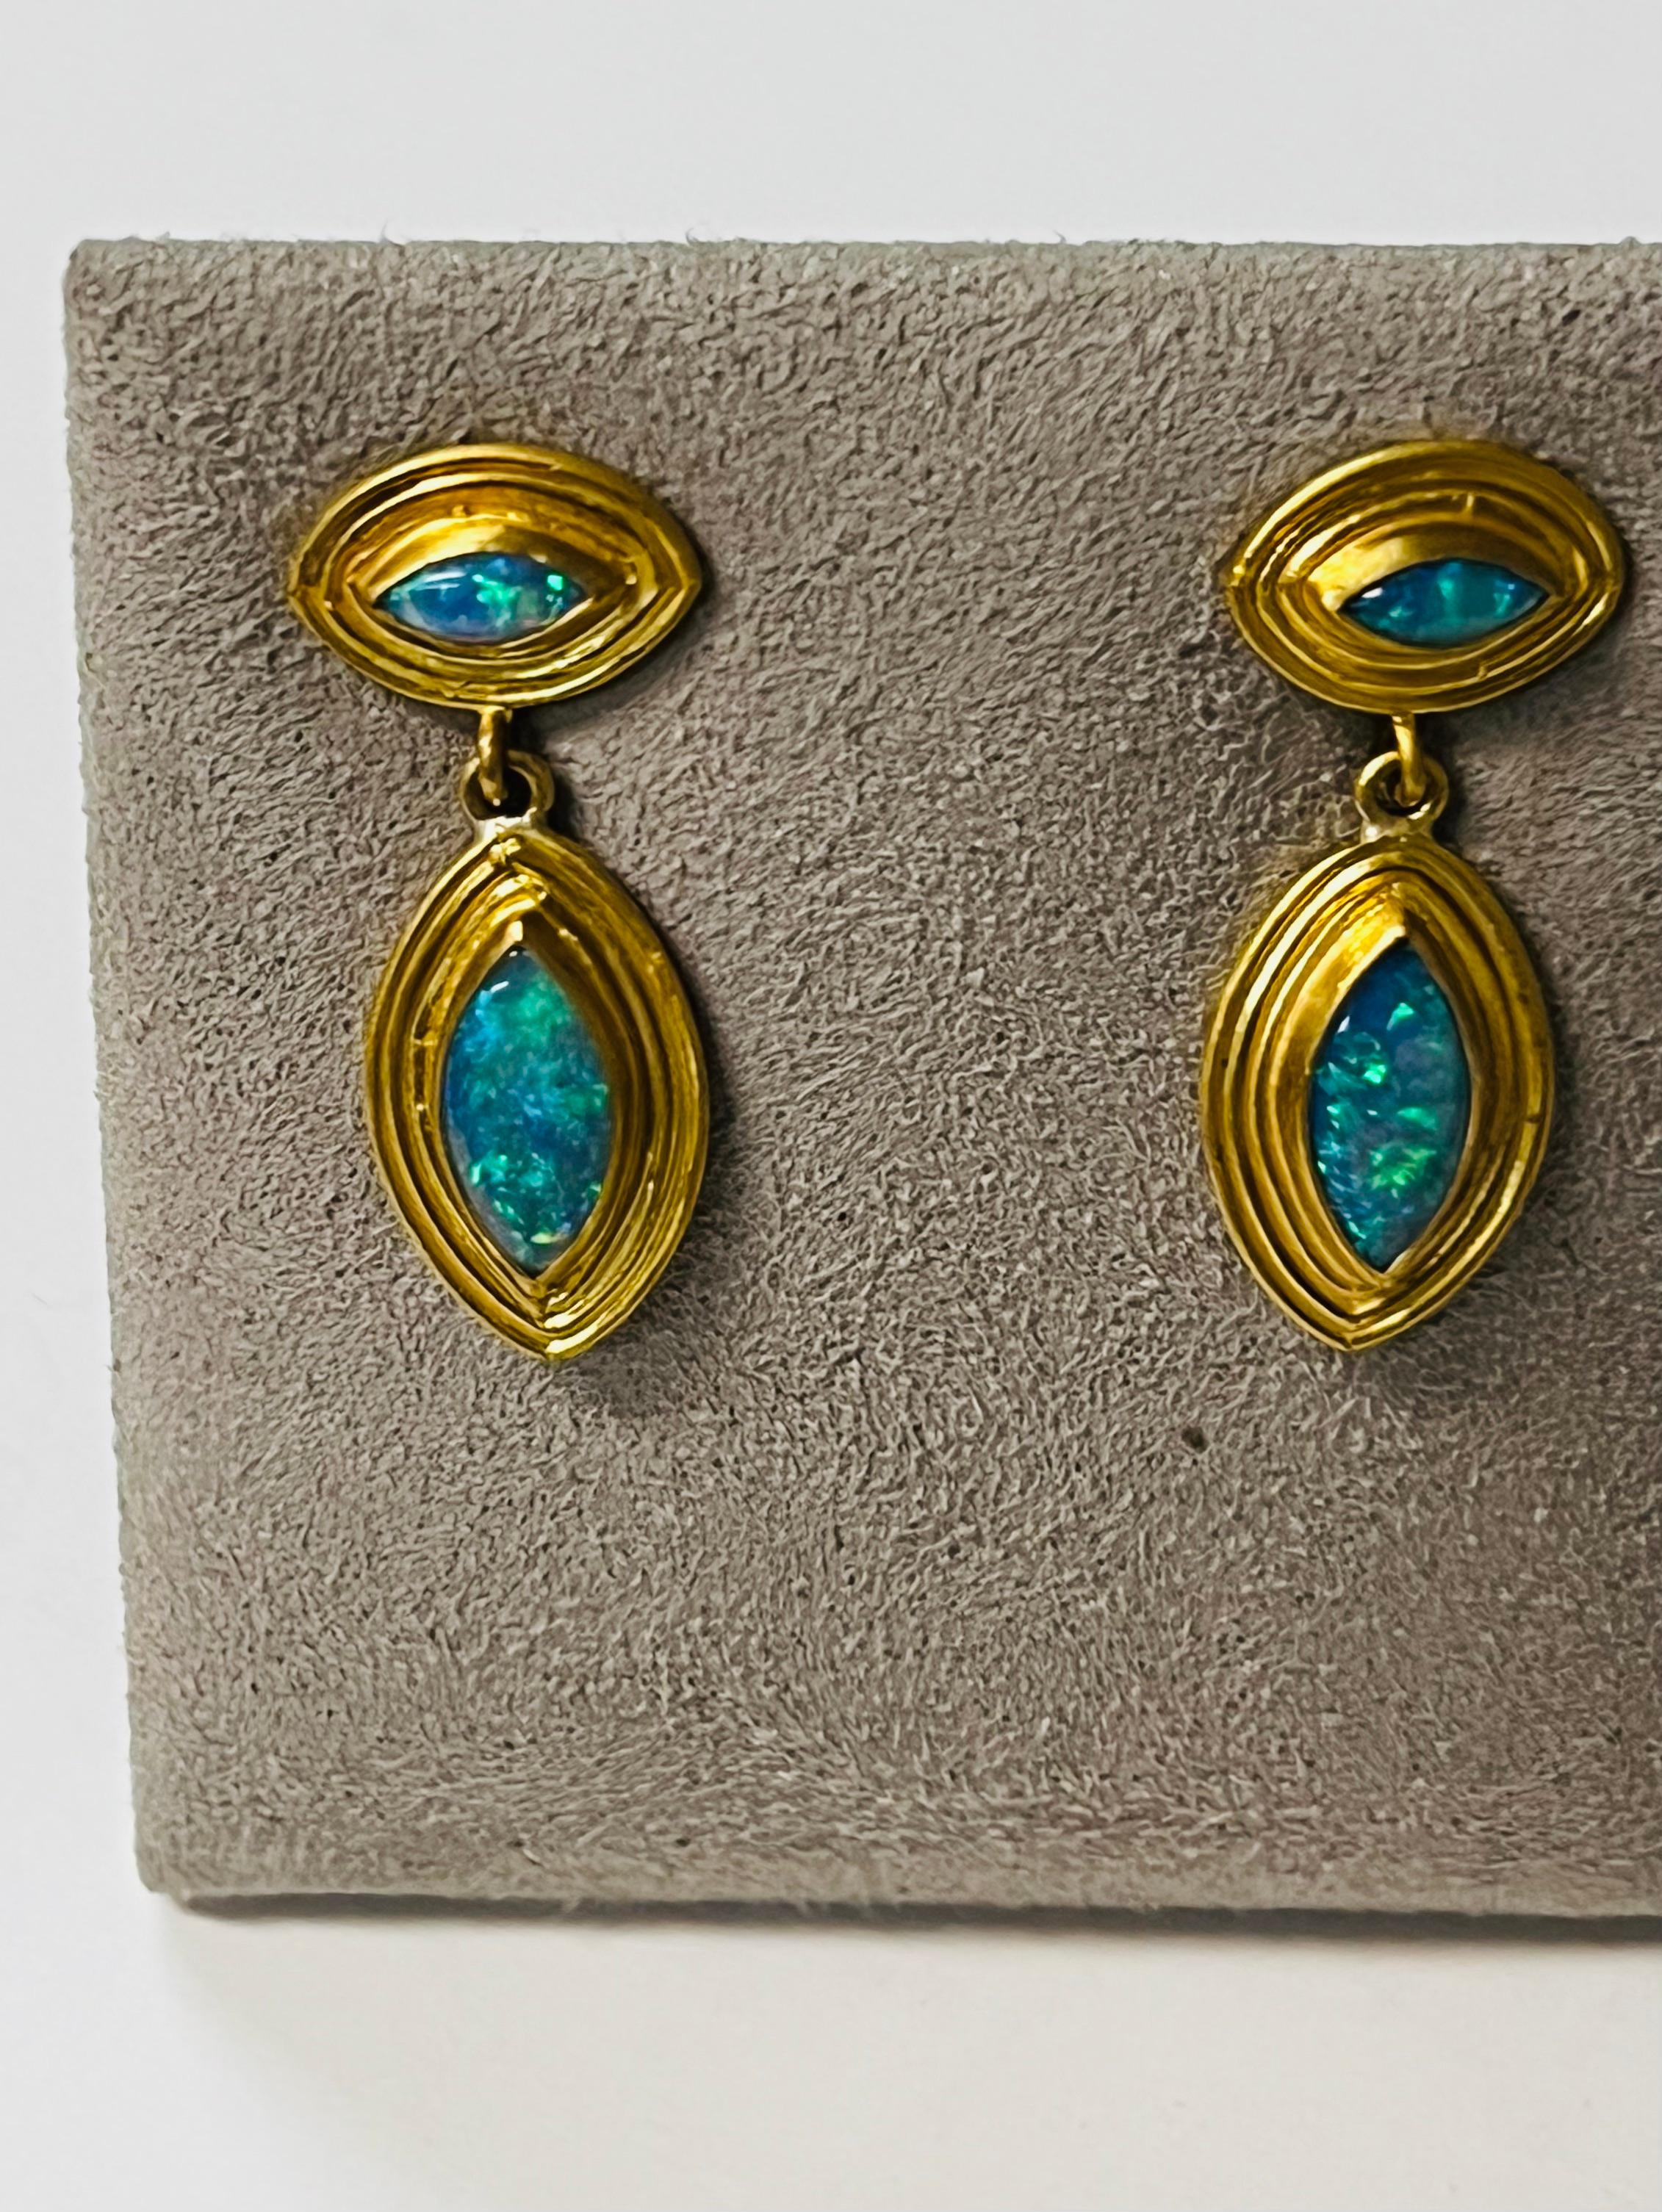 Fine Australian Opal Marquise earrings set in 22 Karat gold with 18 Karat posts and 14 Karat jumbo backs.
These beautiful earrings will light up anyone with their vivid yet delicate glow.
The opals weigh 2.42cts  and hang 1.82 inches long  .53